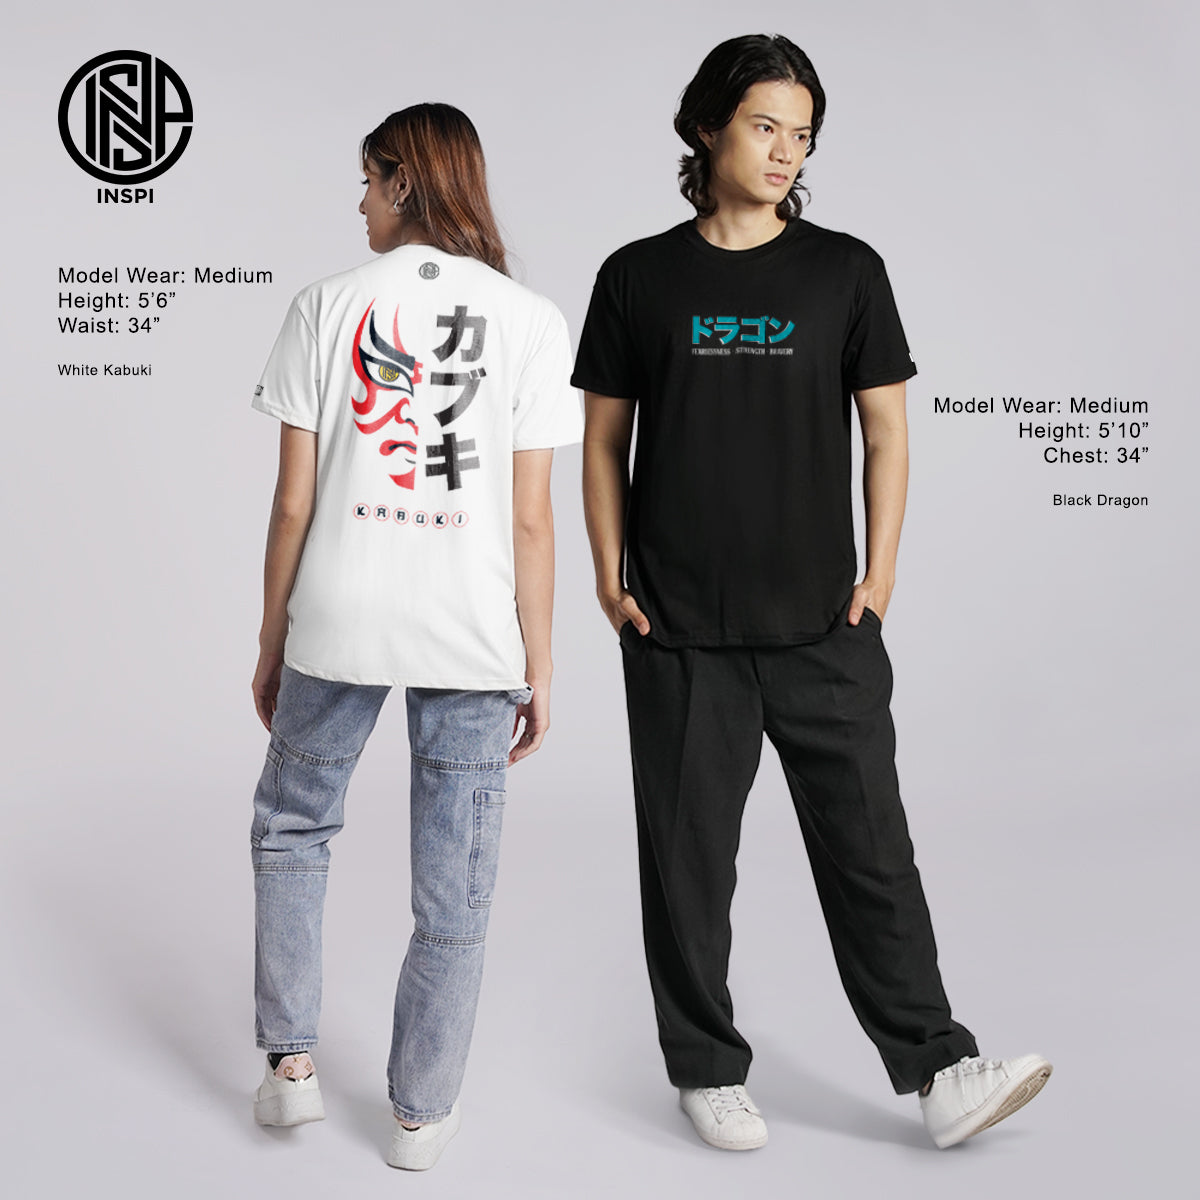 INSPI Minimal Oriental Japanese Crane T Shirt for Men Trendy Tops for Women Casual Printed Graphic Tee Collection Casual Tshirts